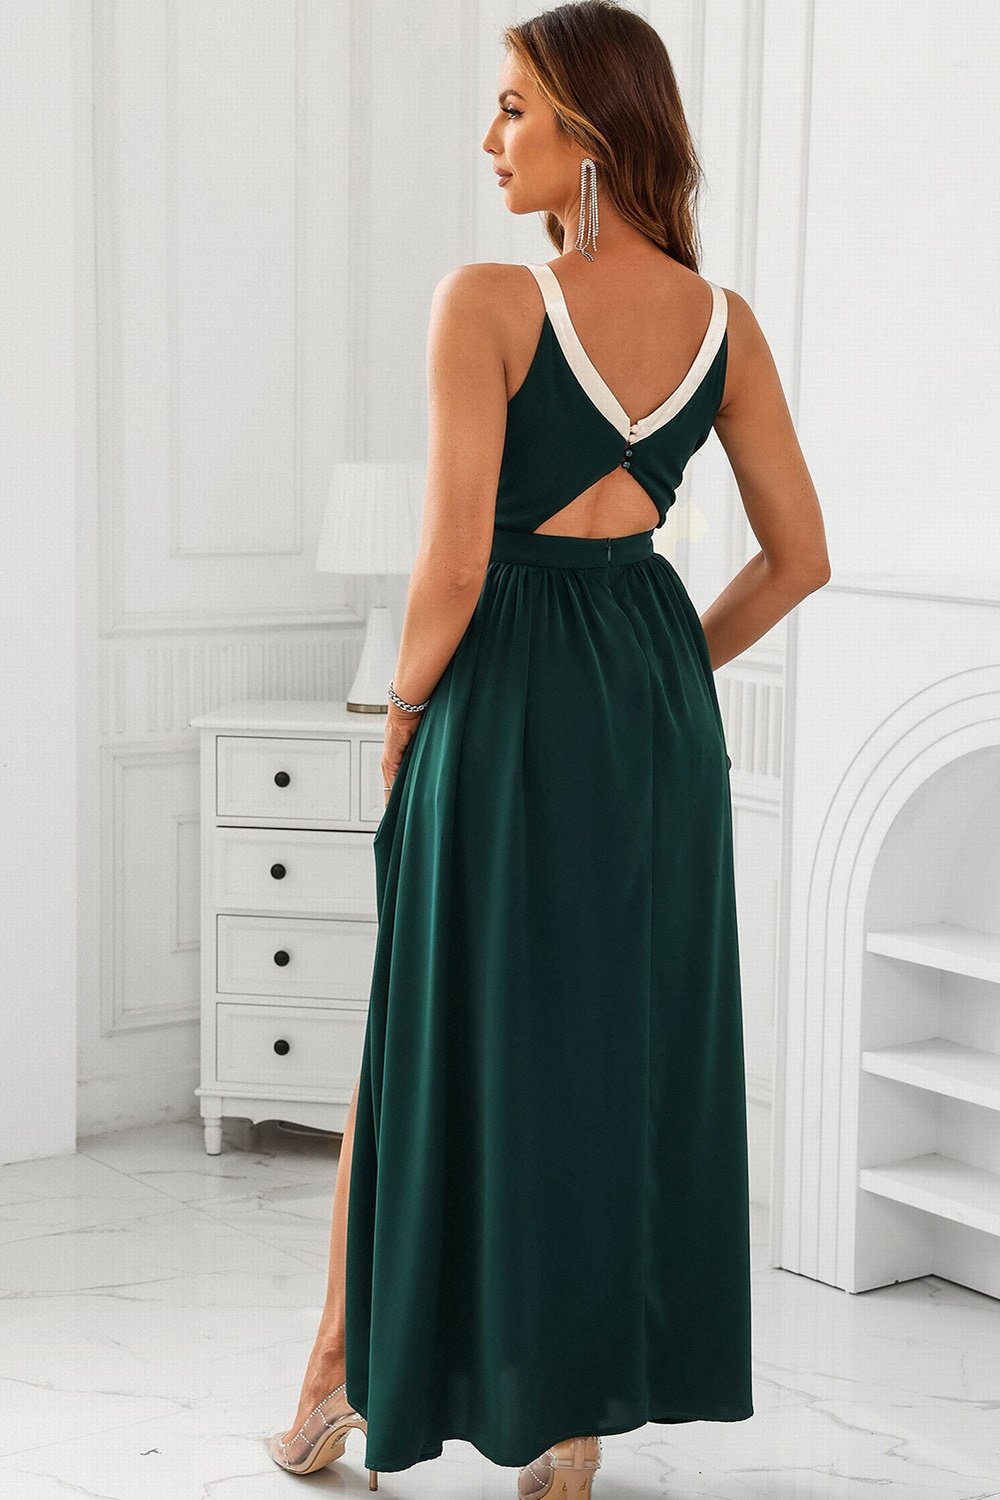 Cutout Ruched Slit Sleeveless Dress - Cocktail Dresses - FITGGINS